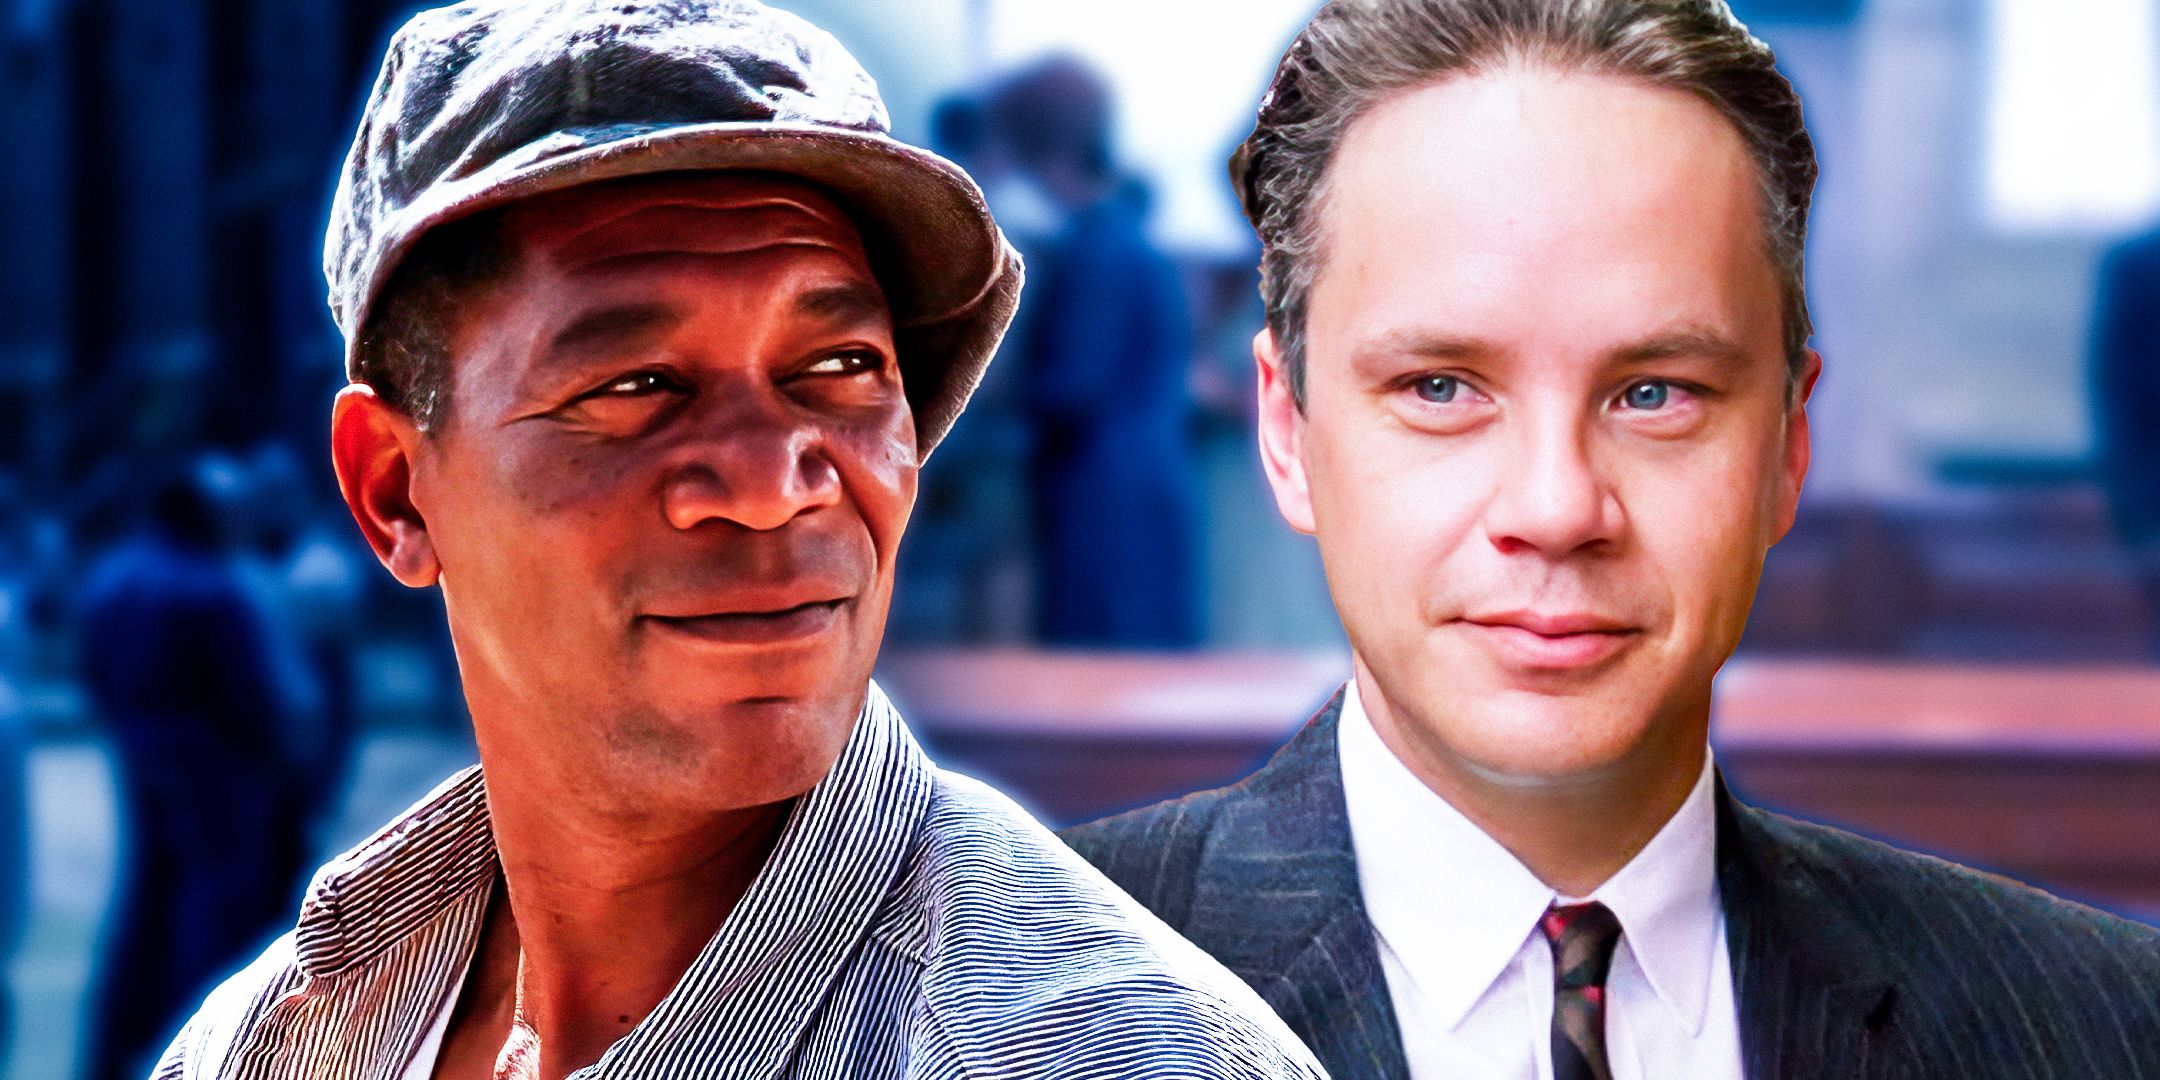 Tim-Robbins-as-Andy-Dufresne-and-Morgan-Freeman-as-Ellis-Boyd-Red-Redding-from-The-Shawshank-Redemption